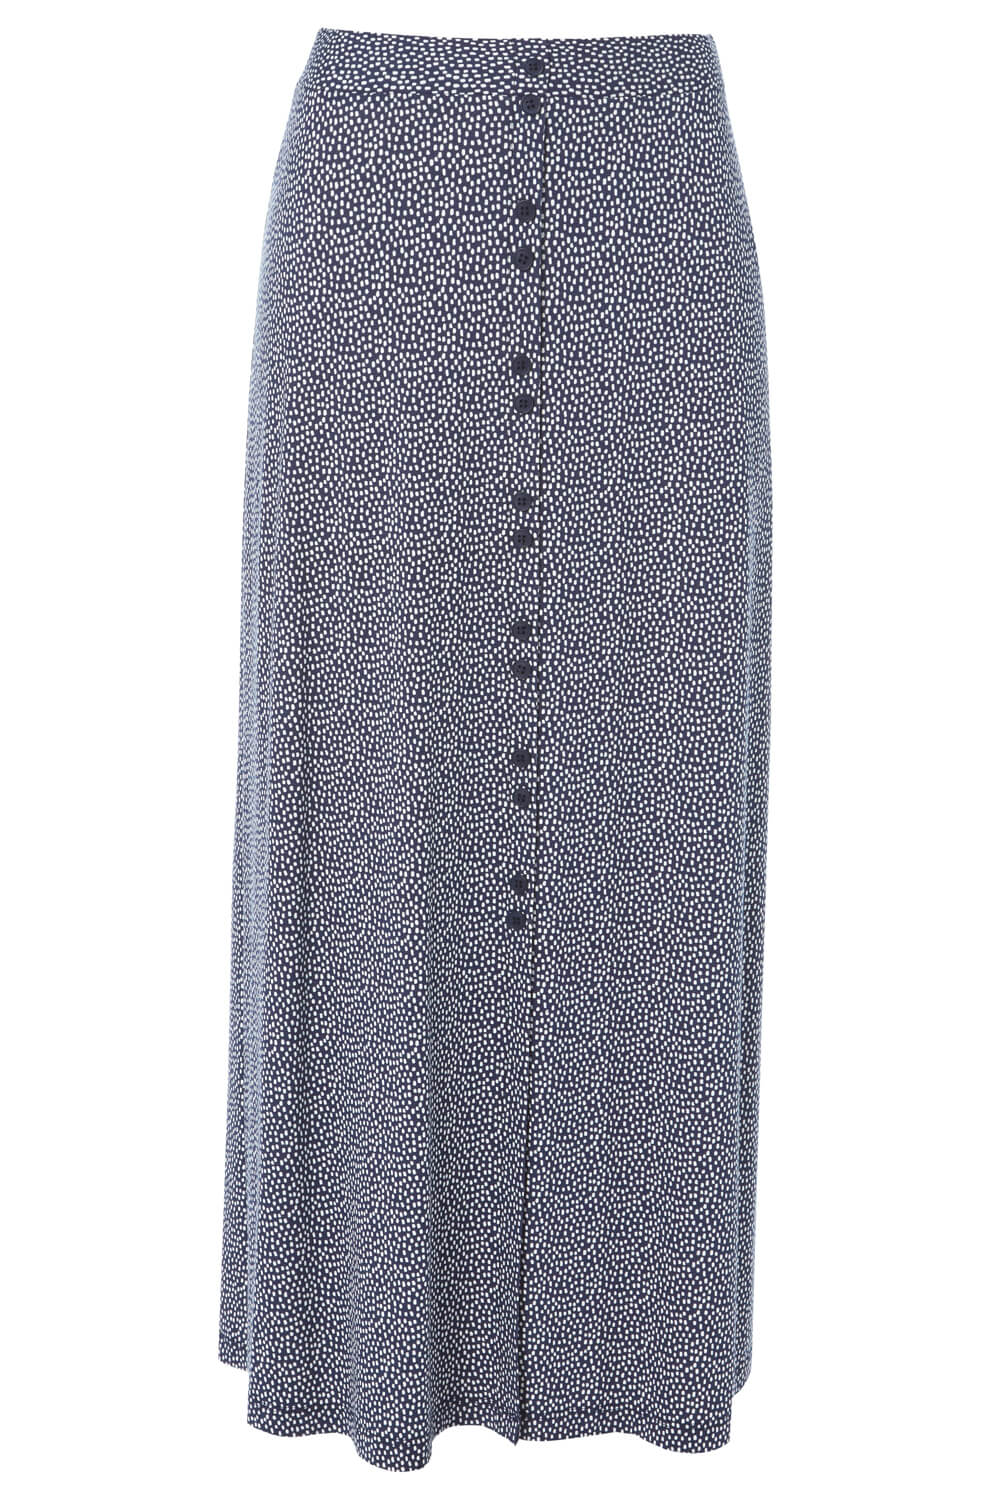 Navy  Spot Button Front Maxi Skirt, Image 4 of 4